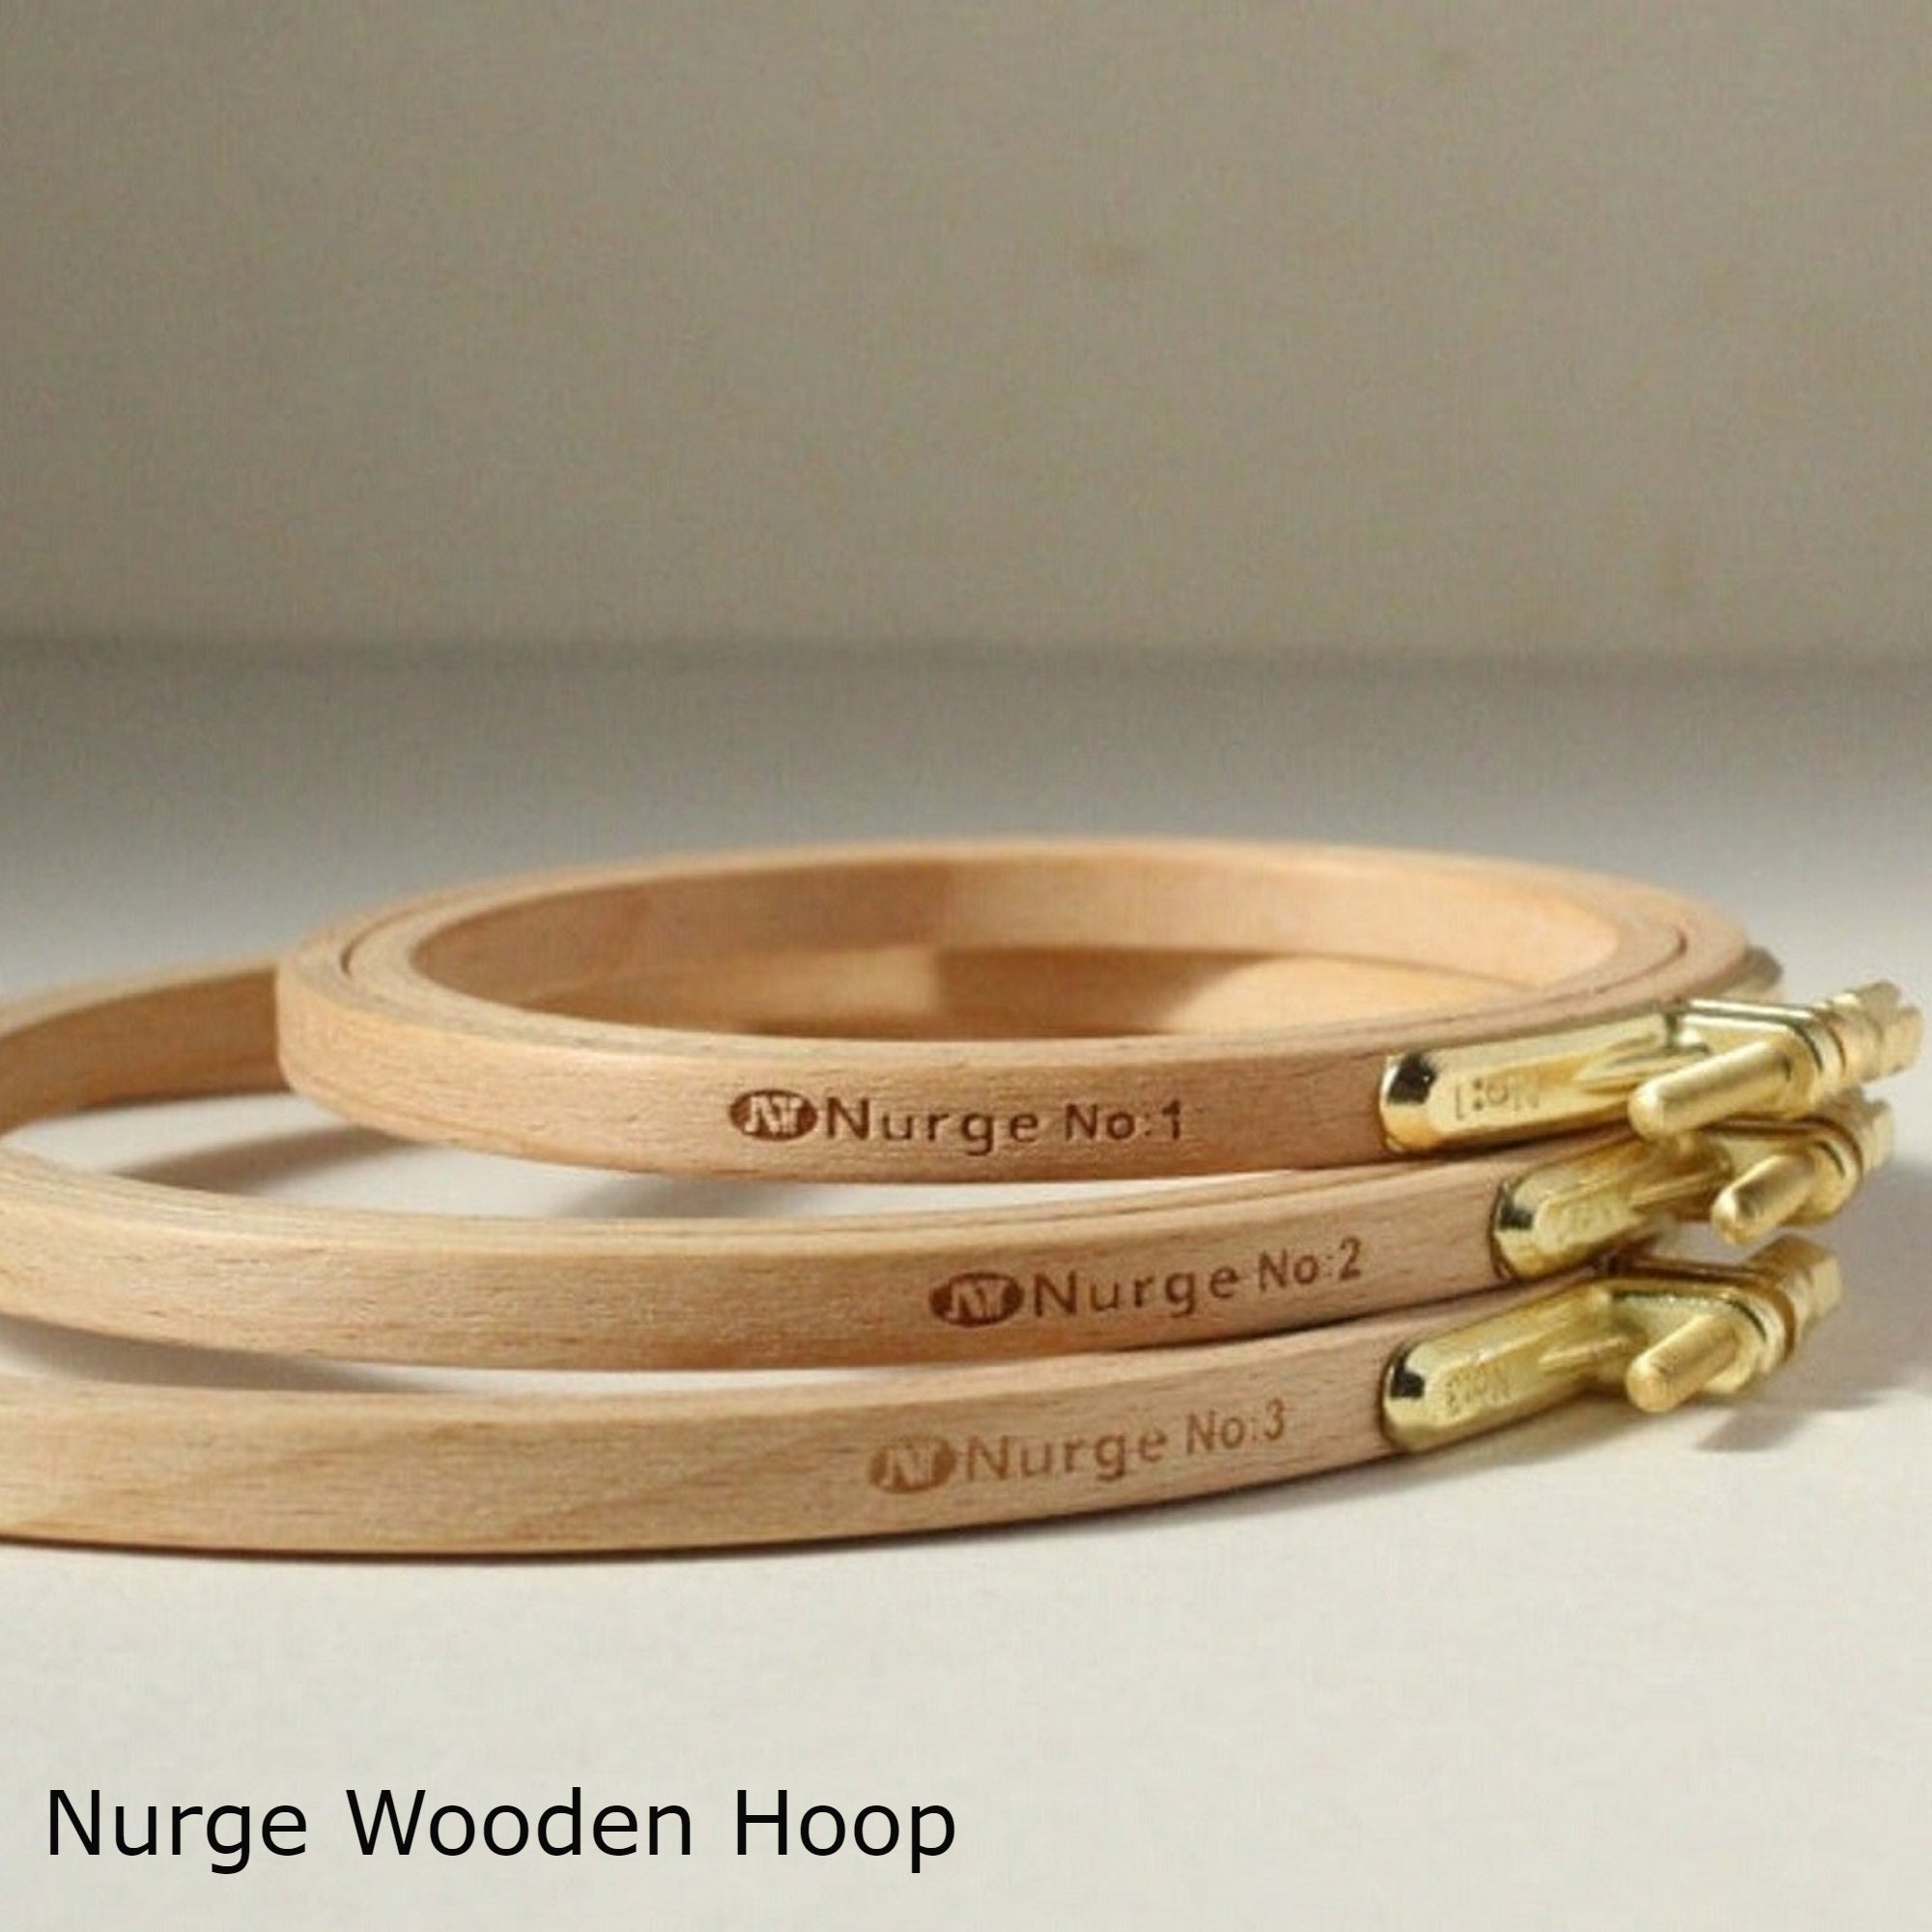 Nurge Wooden Embroidery Ring Cross Stitch Hoop in 8 Sizes 16mm  Depth,needlework Tools,stitching Hoop,wooden Embroidery,beading Hoop 